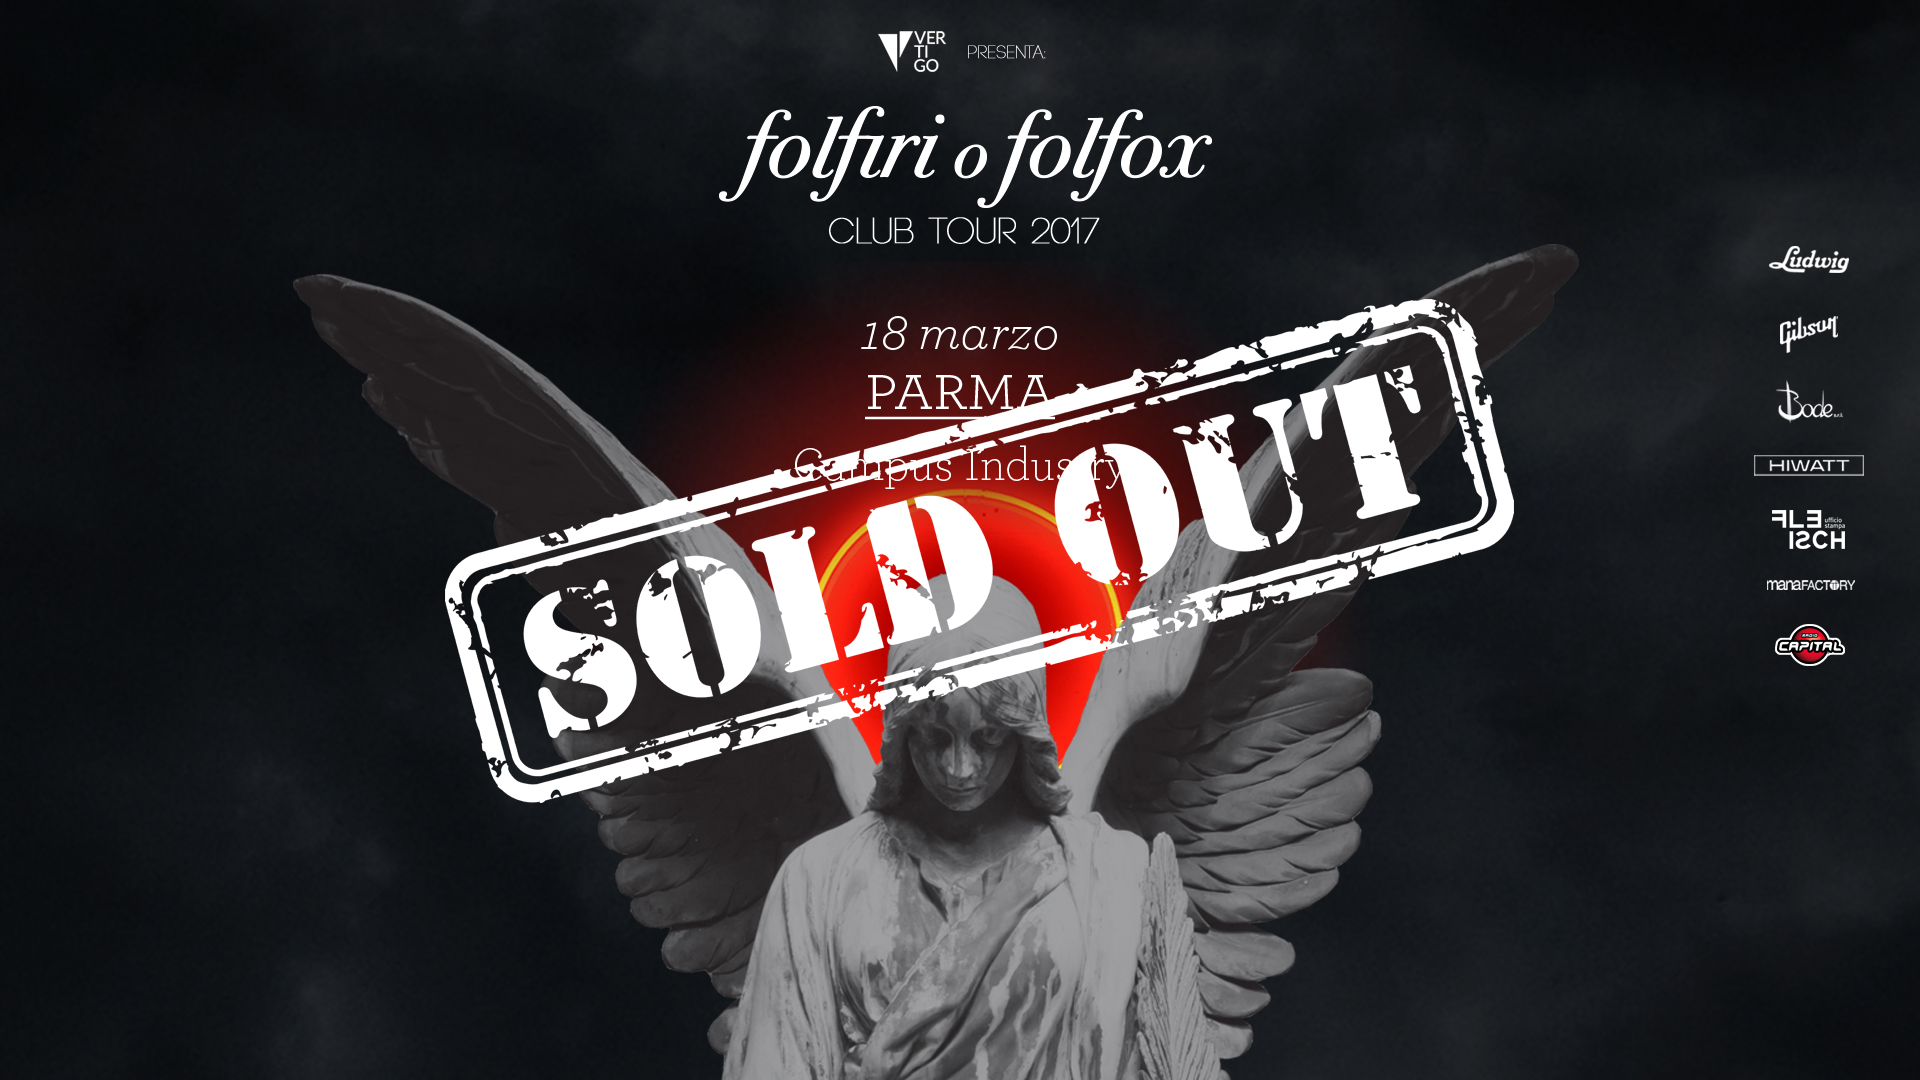 Afterhours sold out